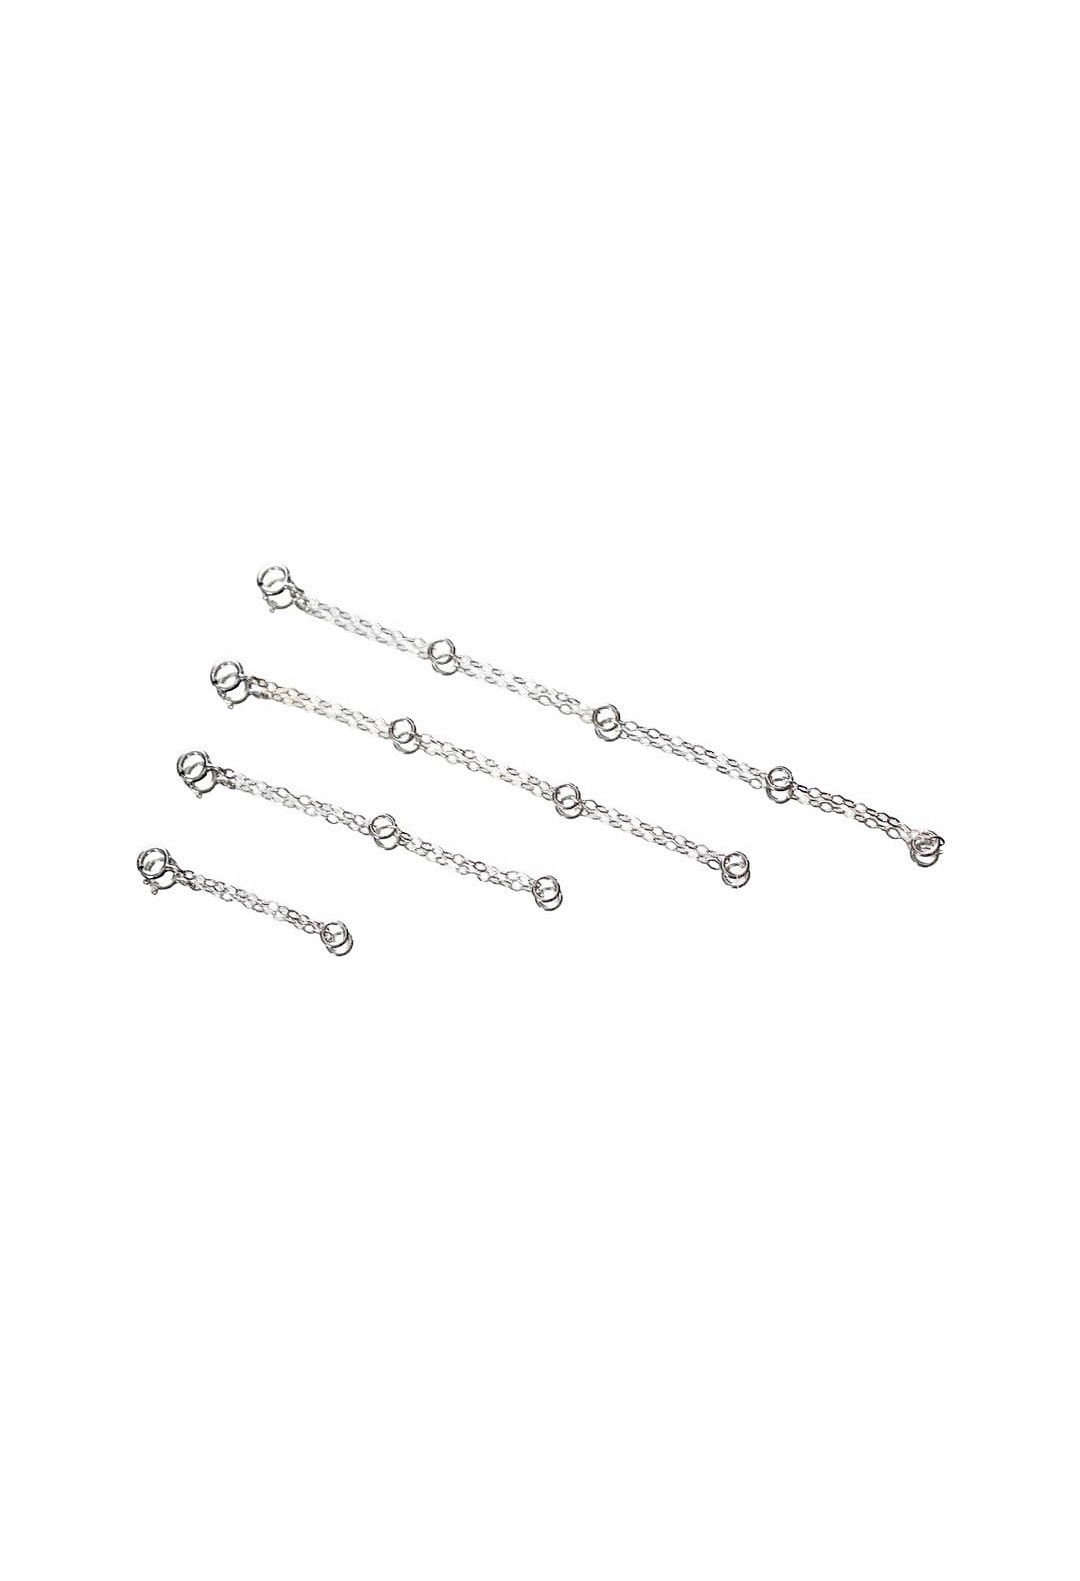 Sterling silver Handmade Extender ∙ 1 2 3 4 inches ∙ Extension Chain ∙ Add to your necklace or bracelet ∙ Necklace extender